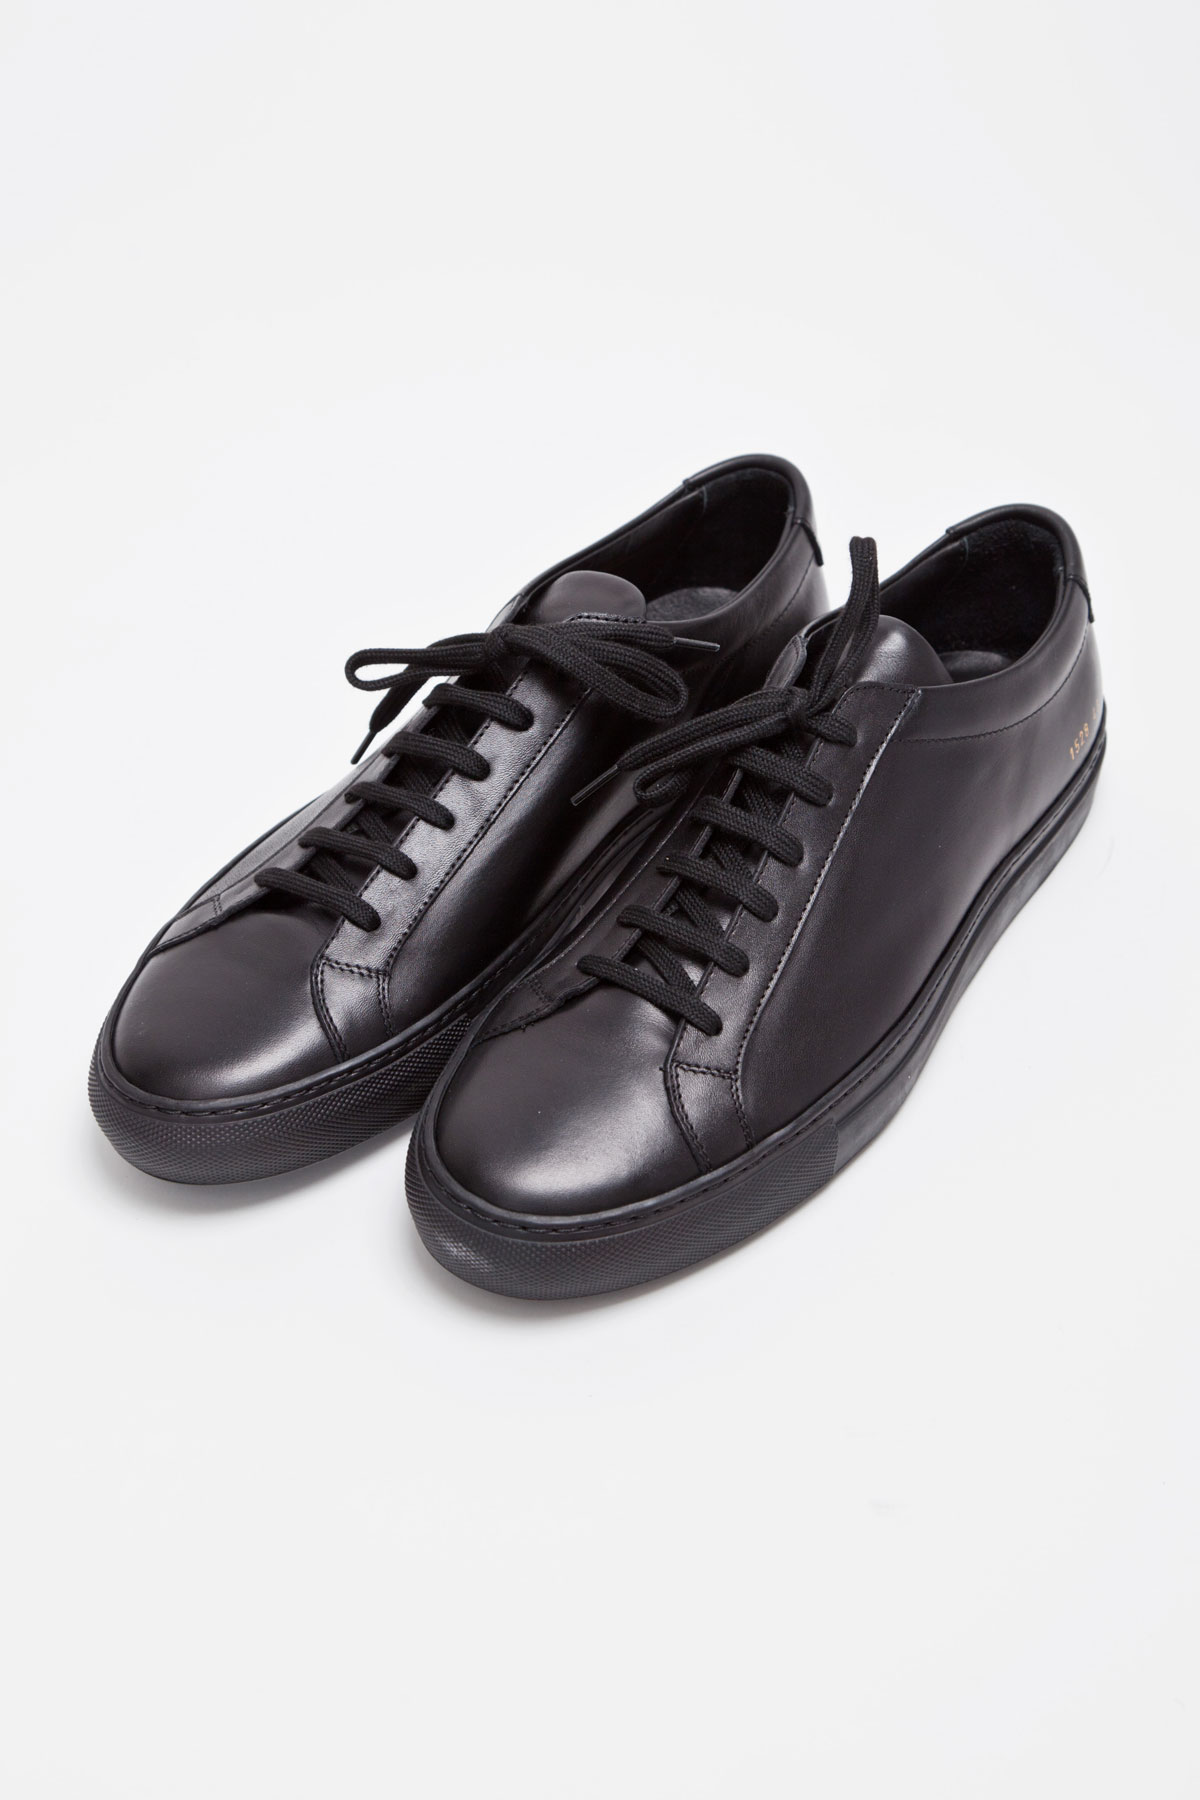 Common Projects - Achilles - STASA